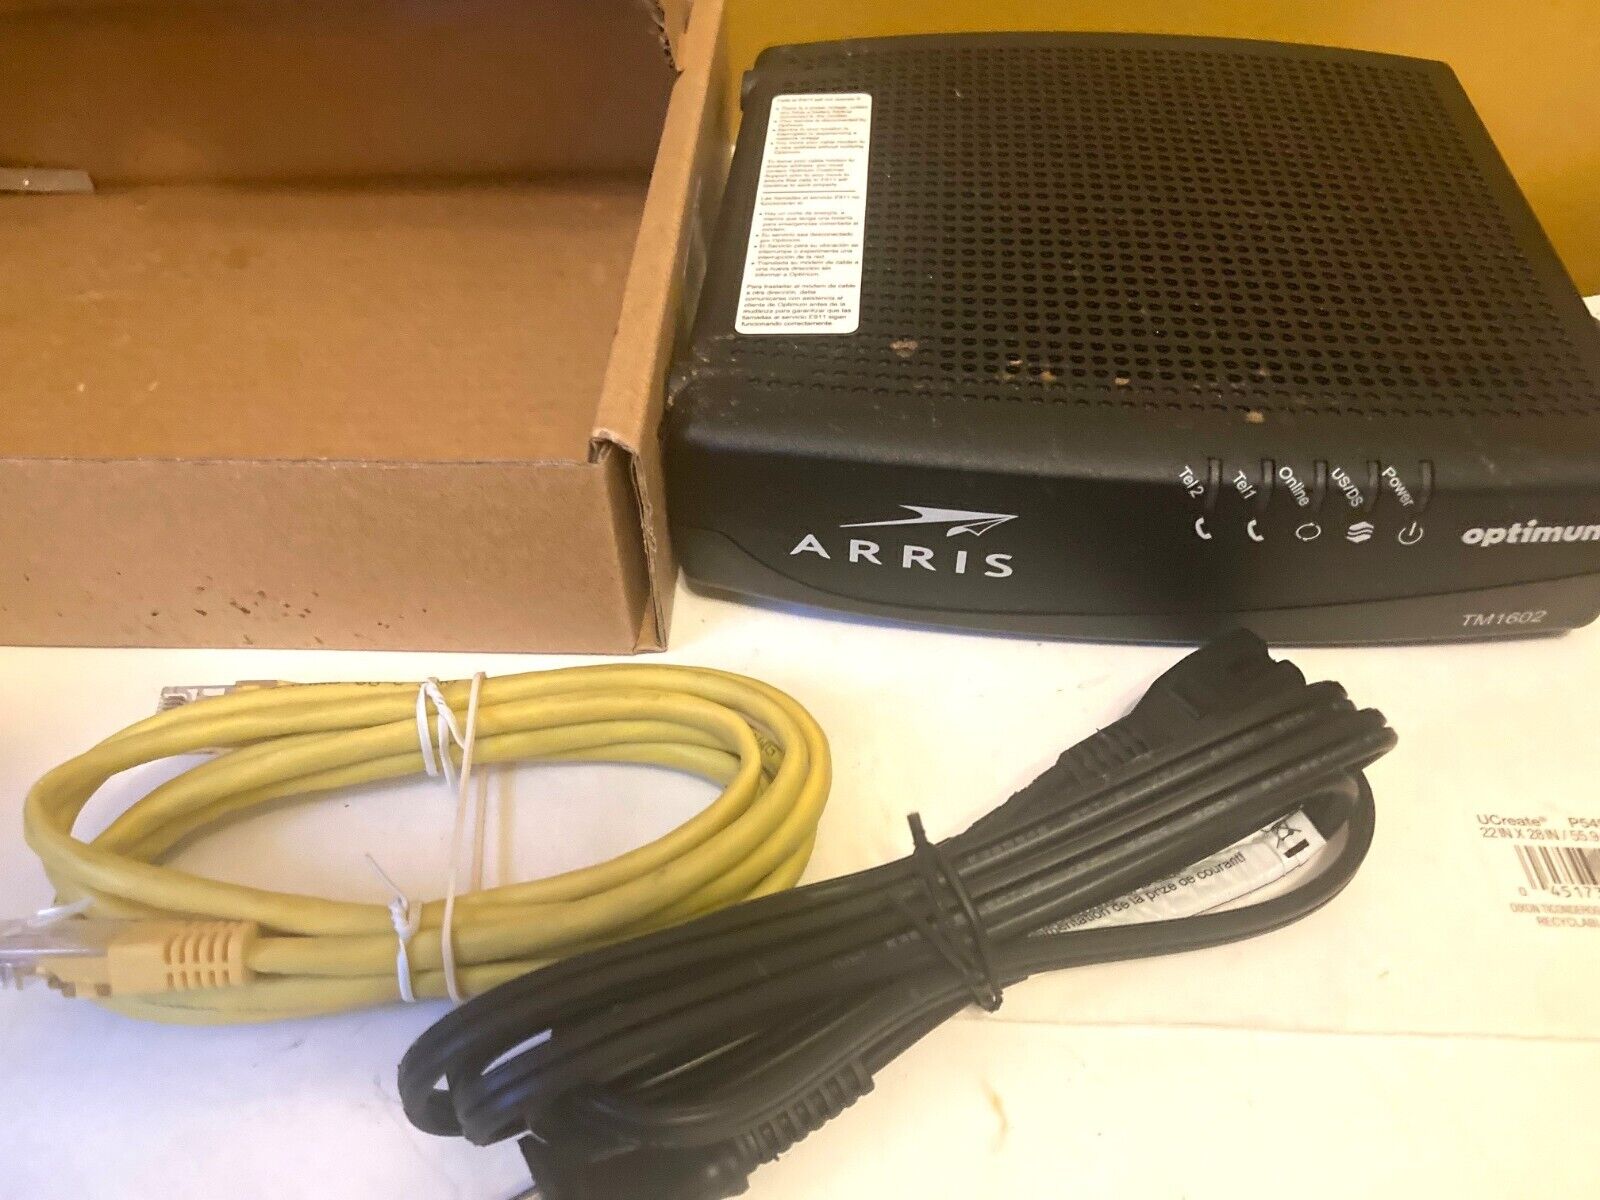 Arris TM1602A Docsis 3.0 Optimum  Touchstonr Telephony Cable Modem New in Box